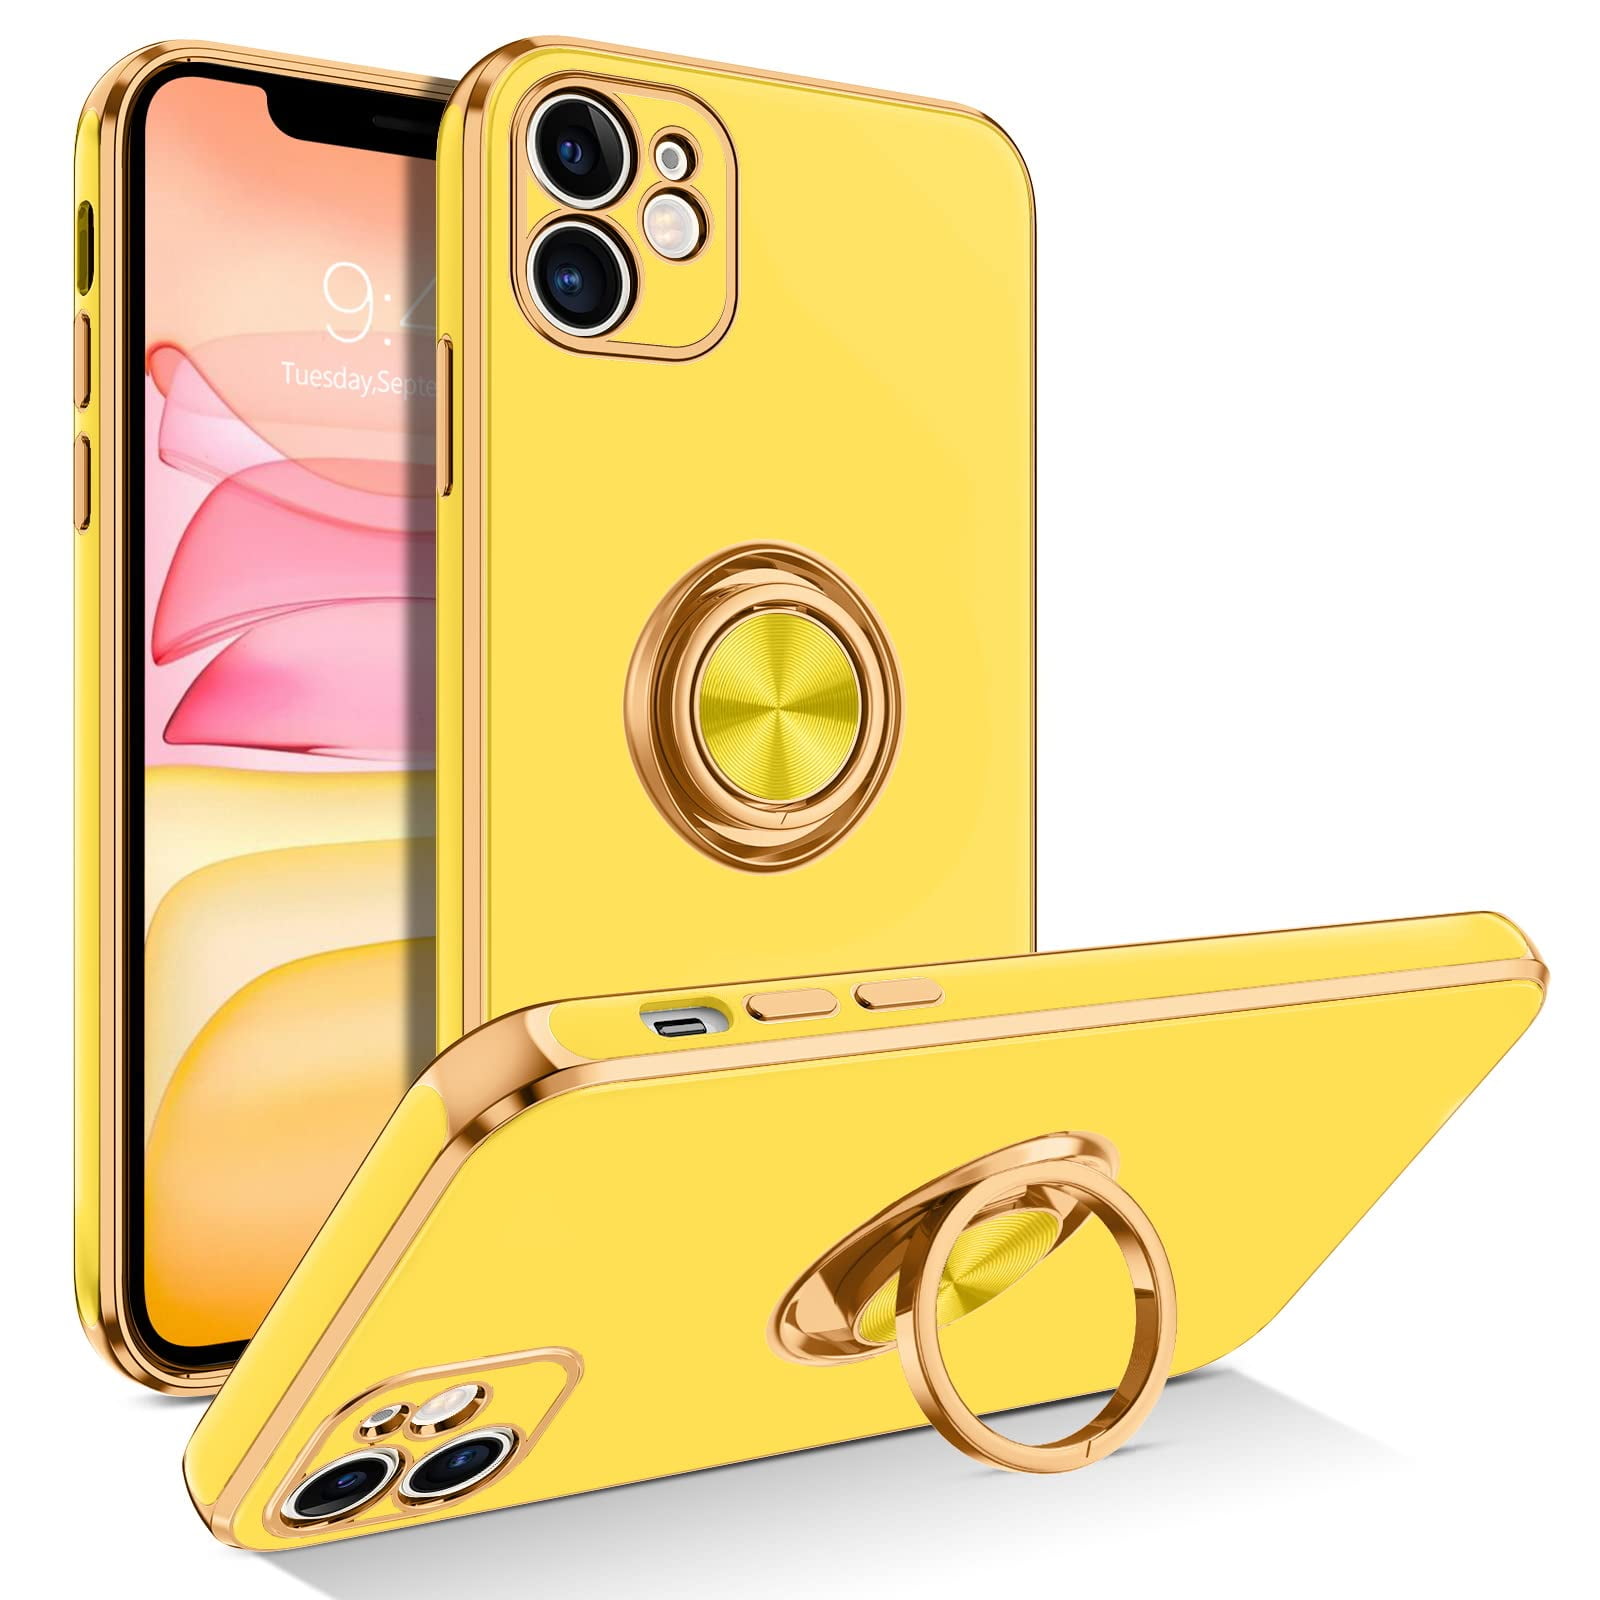 iPhone 11 Case with 360° Ring Holder, Shockproof Slim Kickstand Magnetic  Support Car Mount Women Men Non-Slip Protective Phone Case for iPhone 11 6.1",  Lemon Yellow/Gold